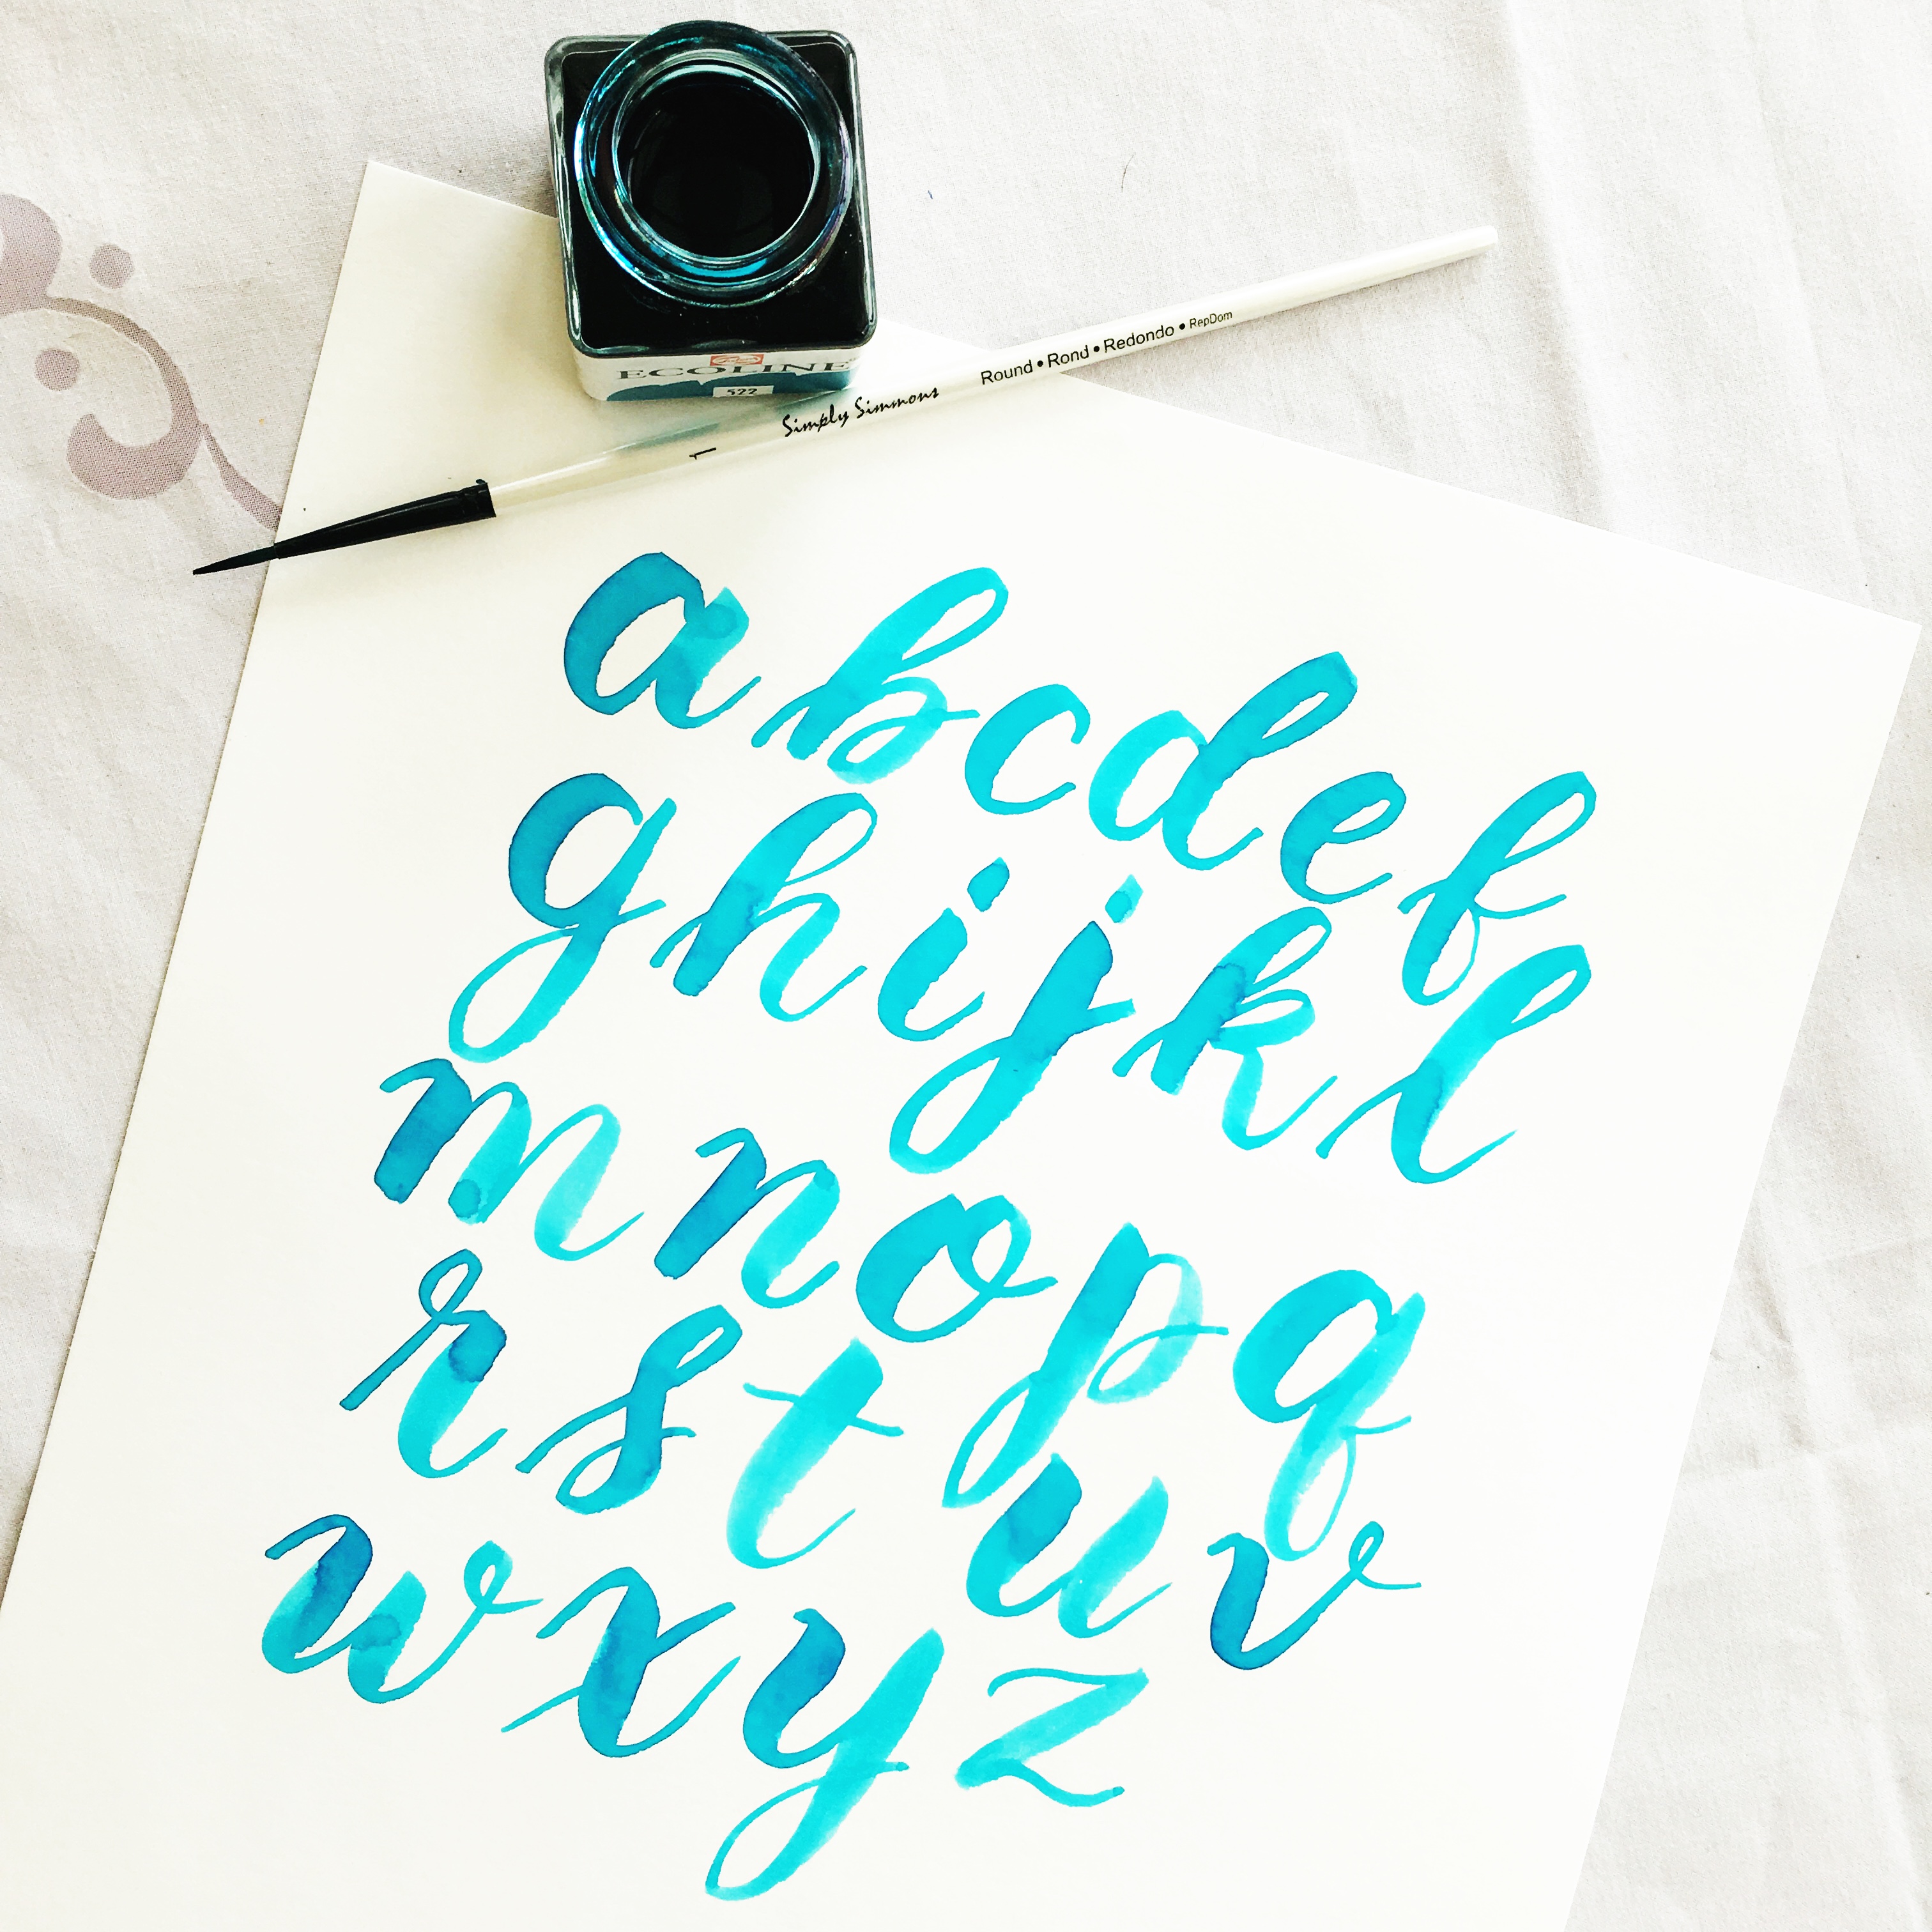 Learn watercolour brush lettering with the best tracing worksheets by www.kellycreates.ca